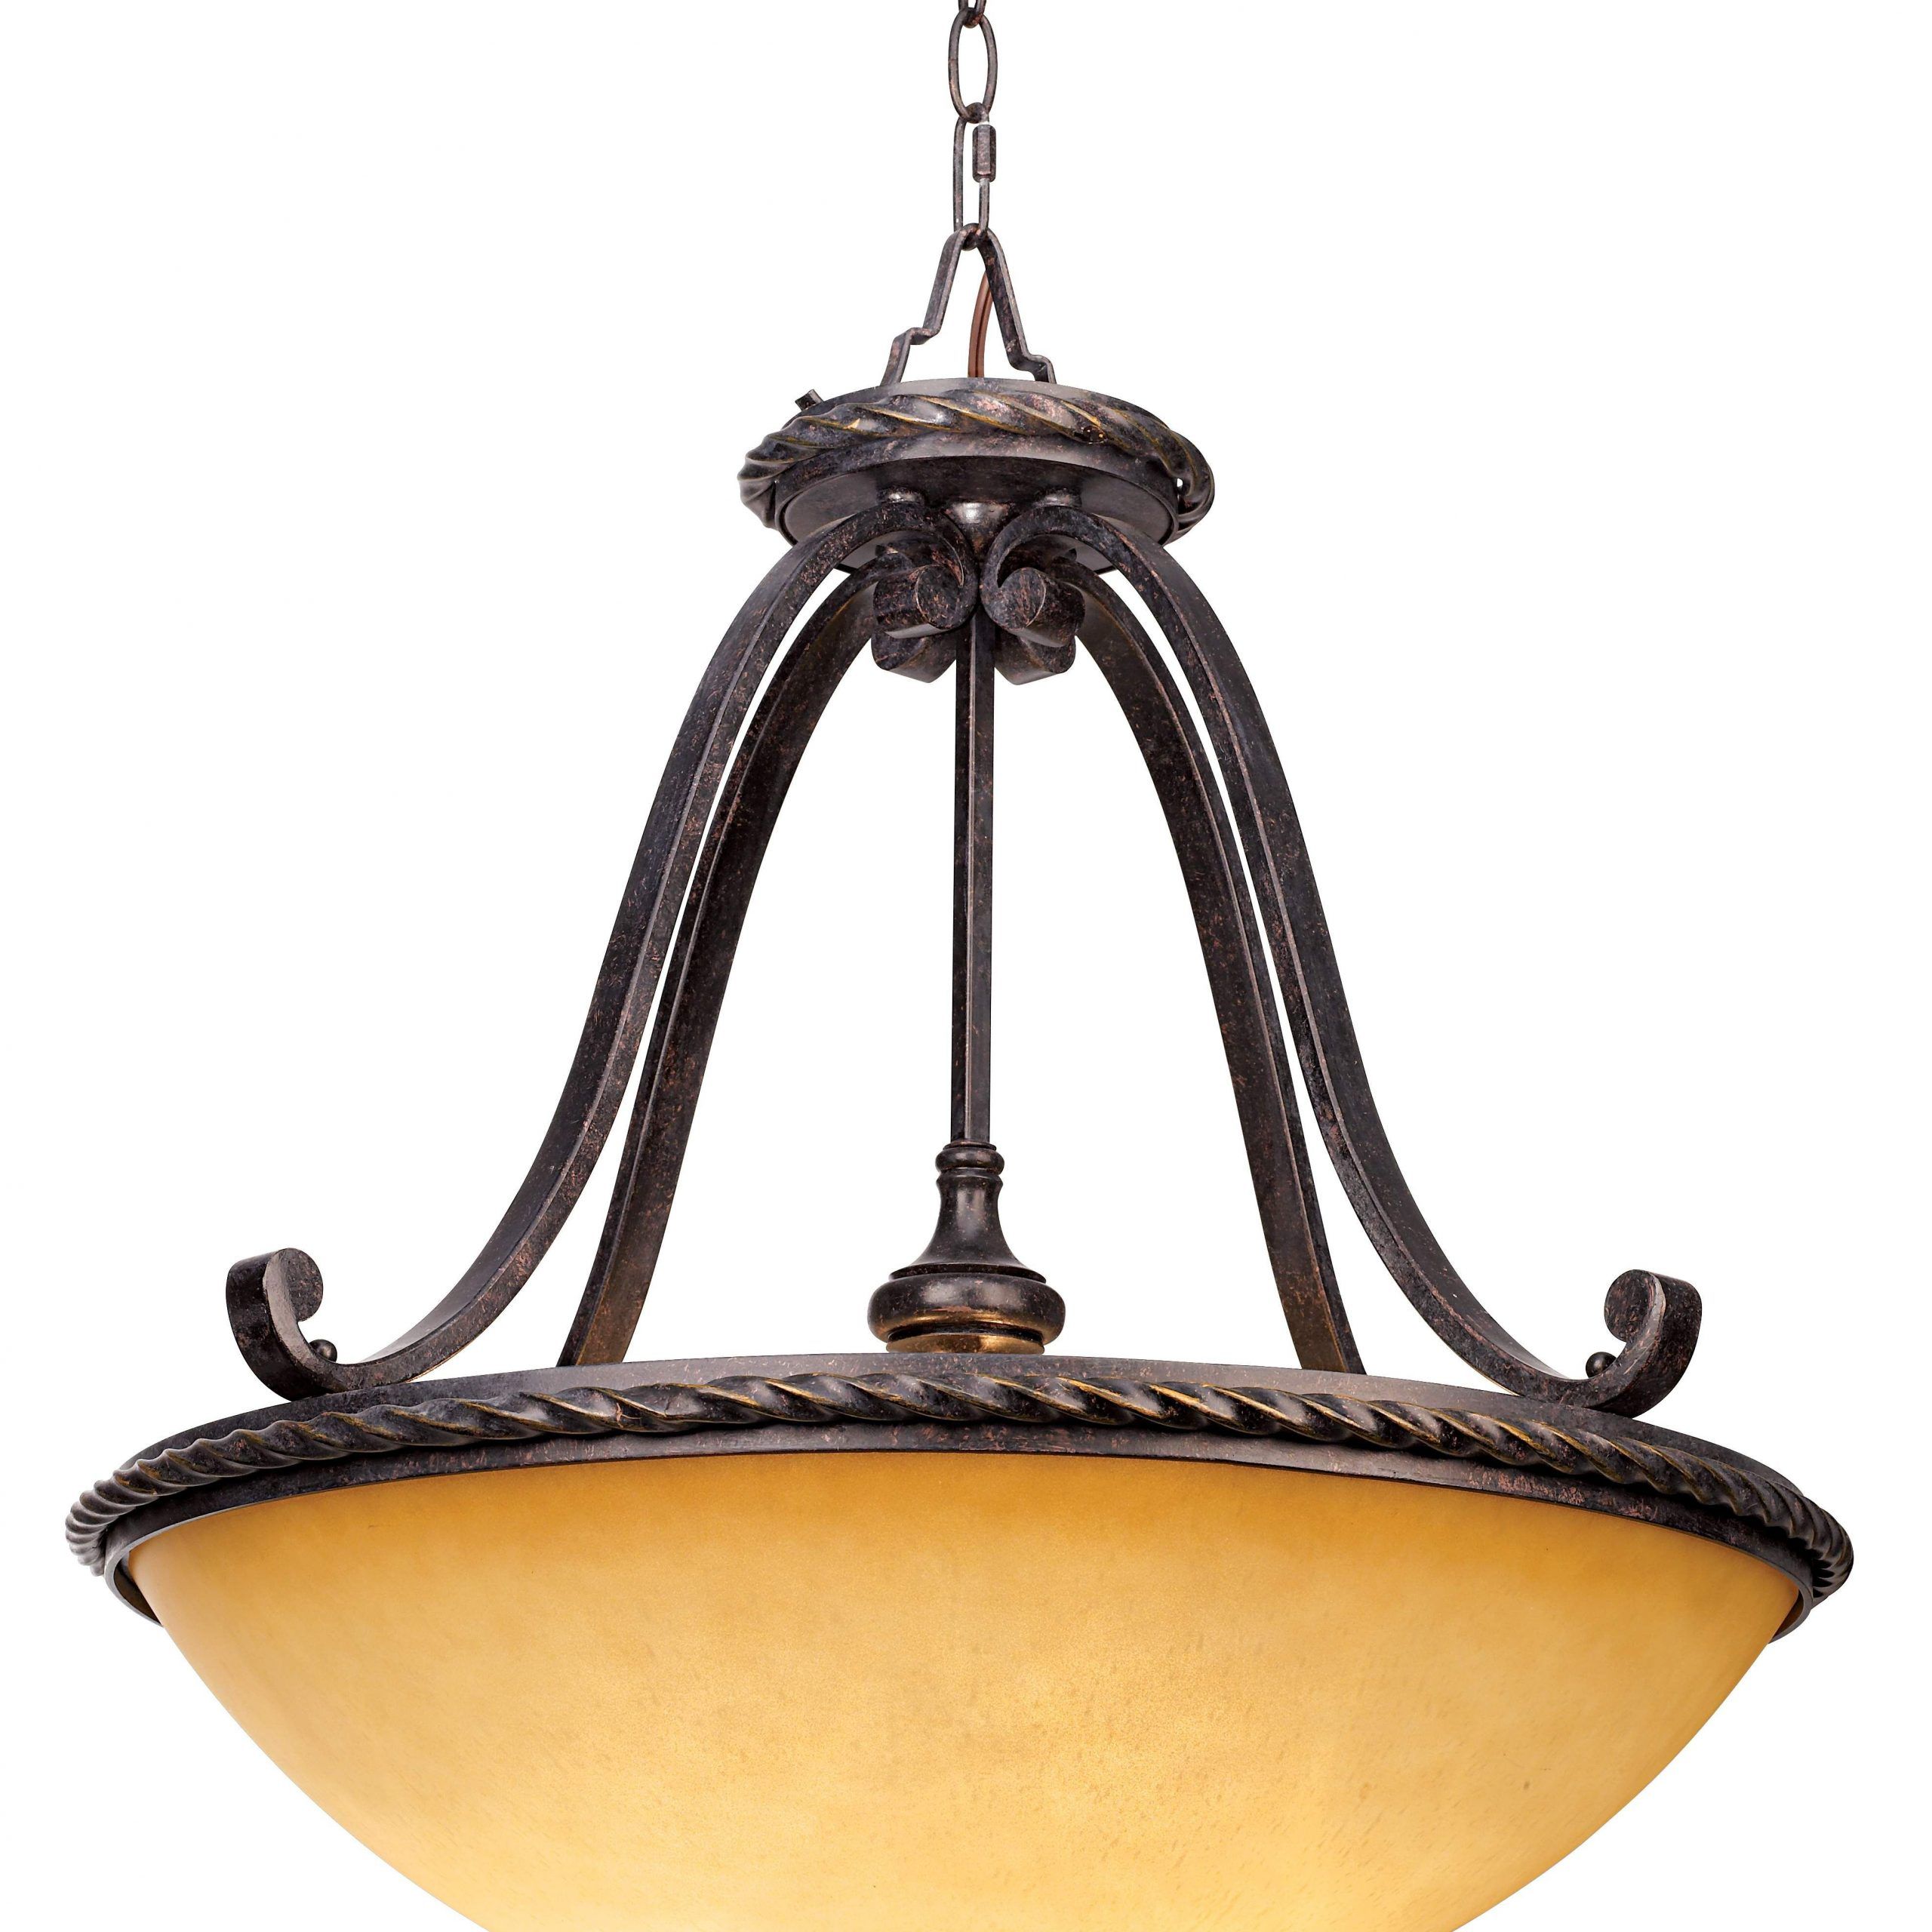 Amber Scavo Glass 22" Wide 3 Light Bowl Pendant Light For Bronze With Clear Glass Pendant Lights (View 4 of 15)